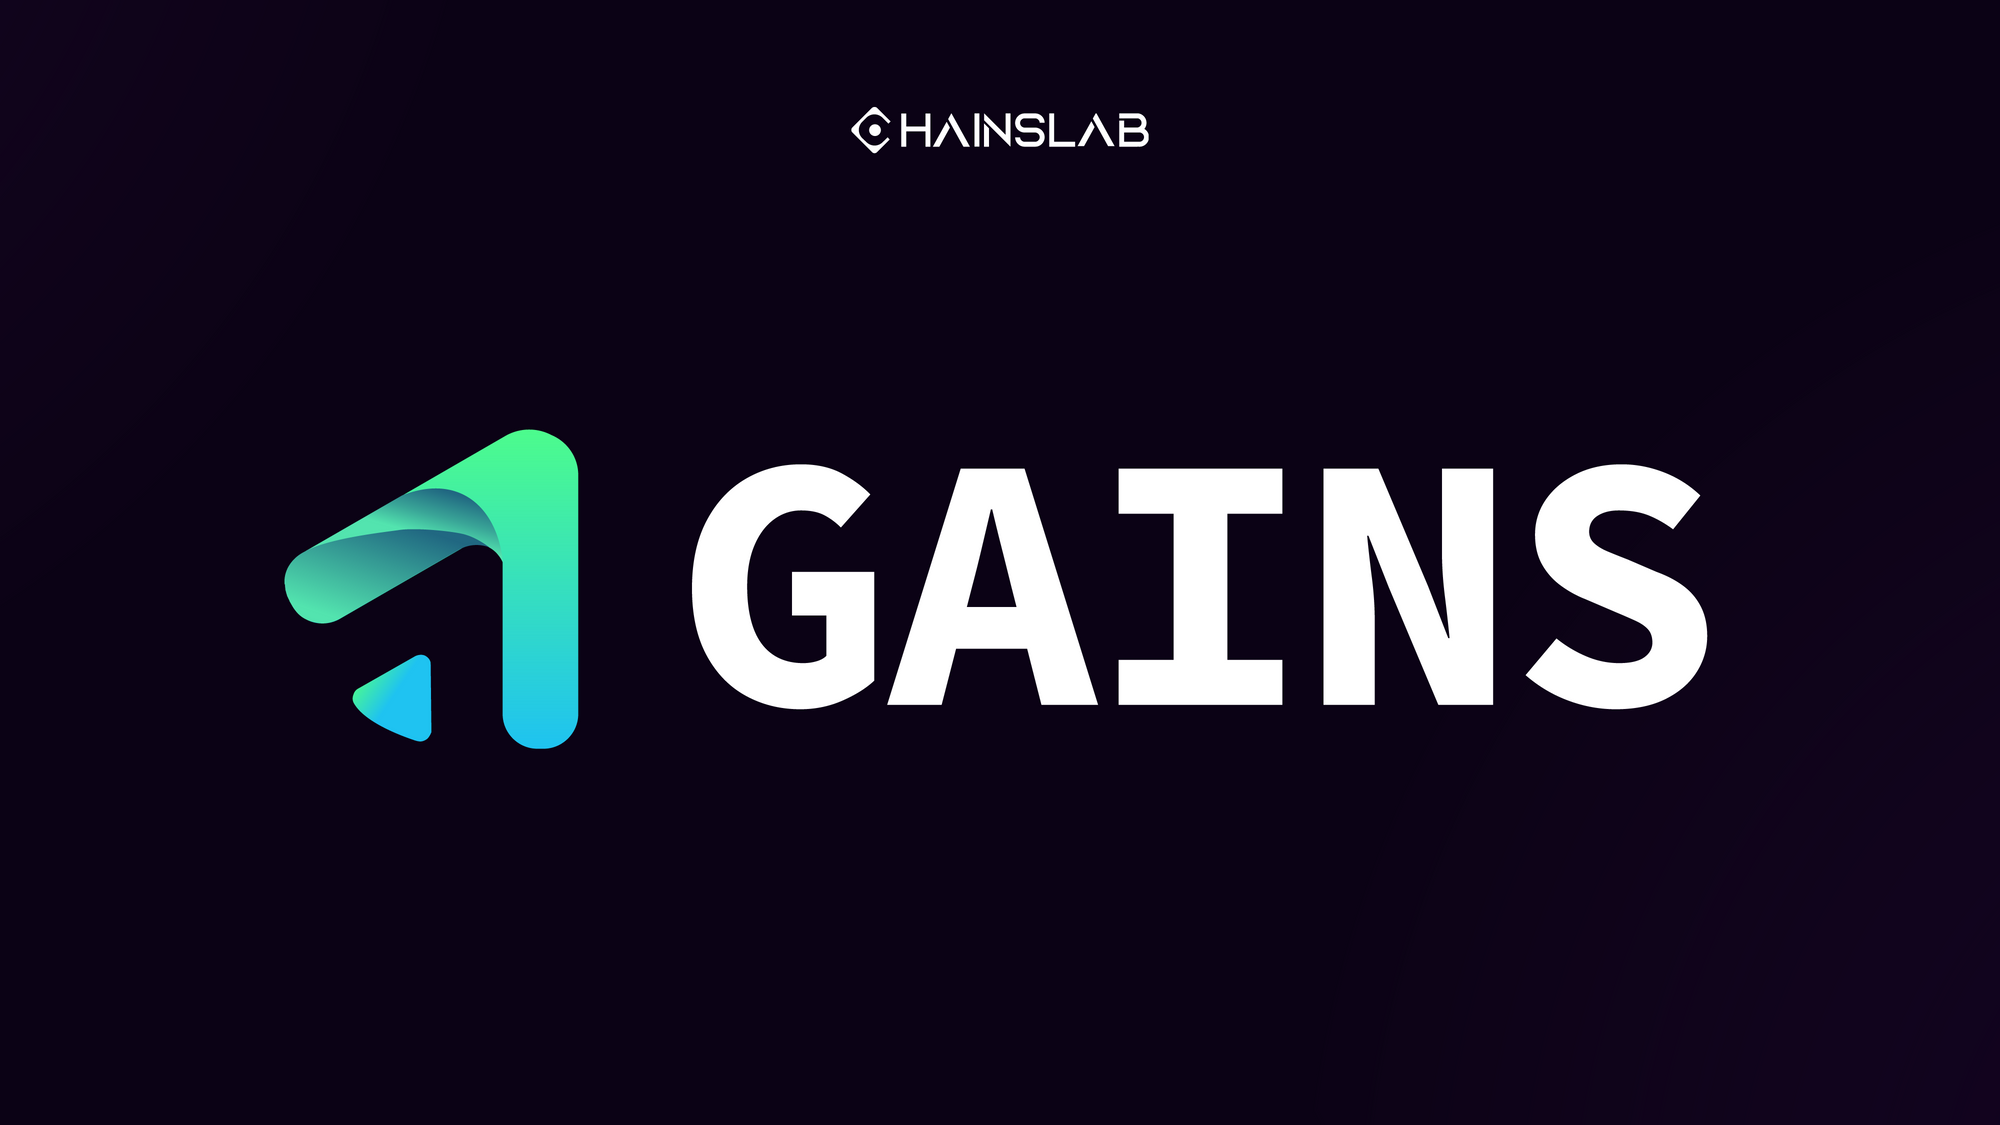 What Is Gains Network? The World's First On-Chain Stock Leveraged Trading